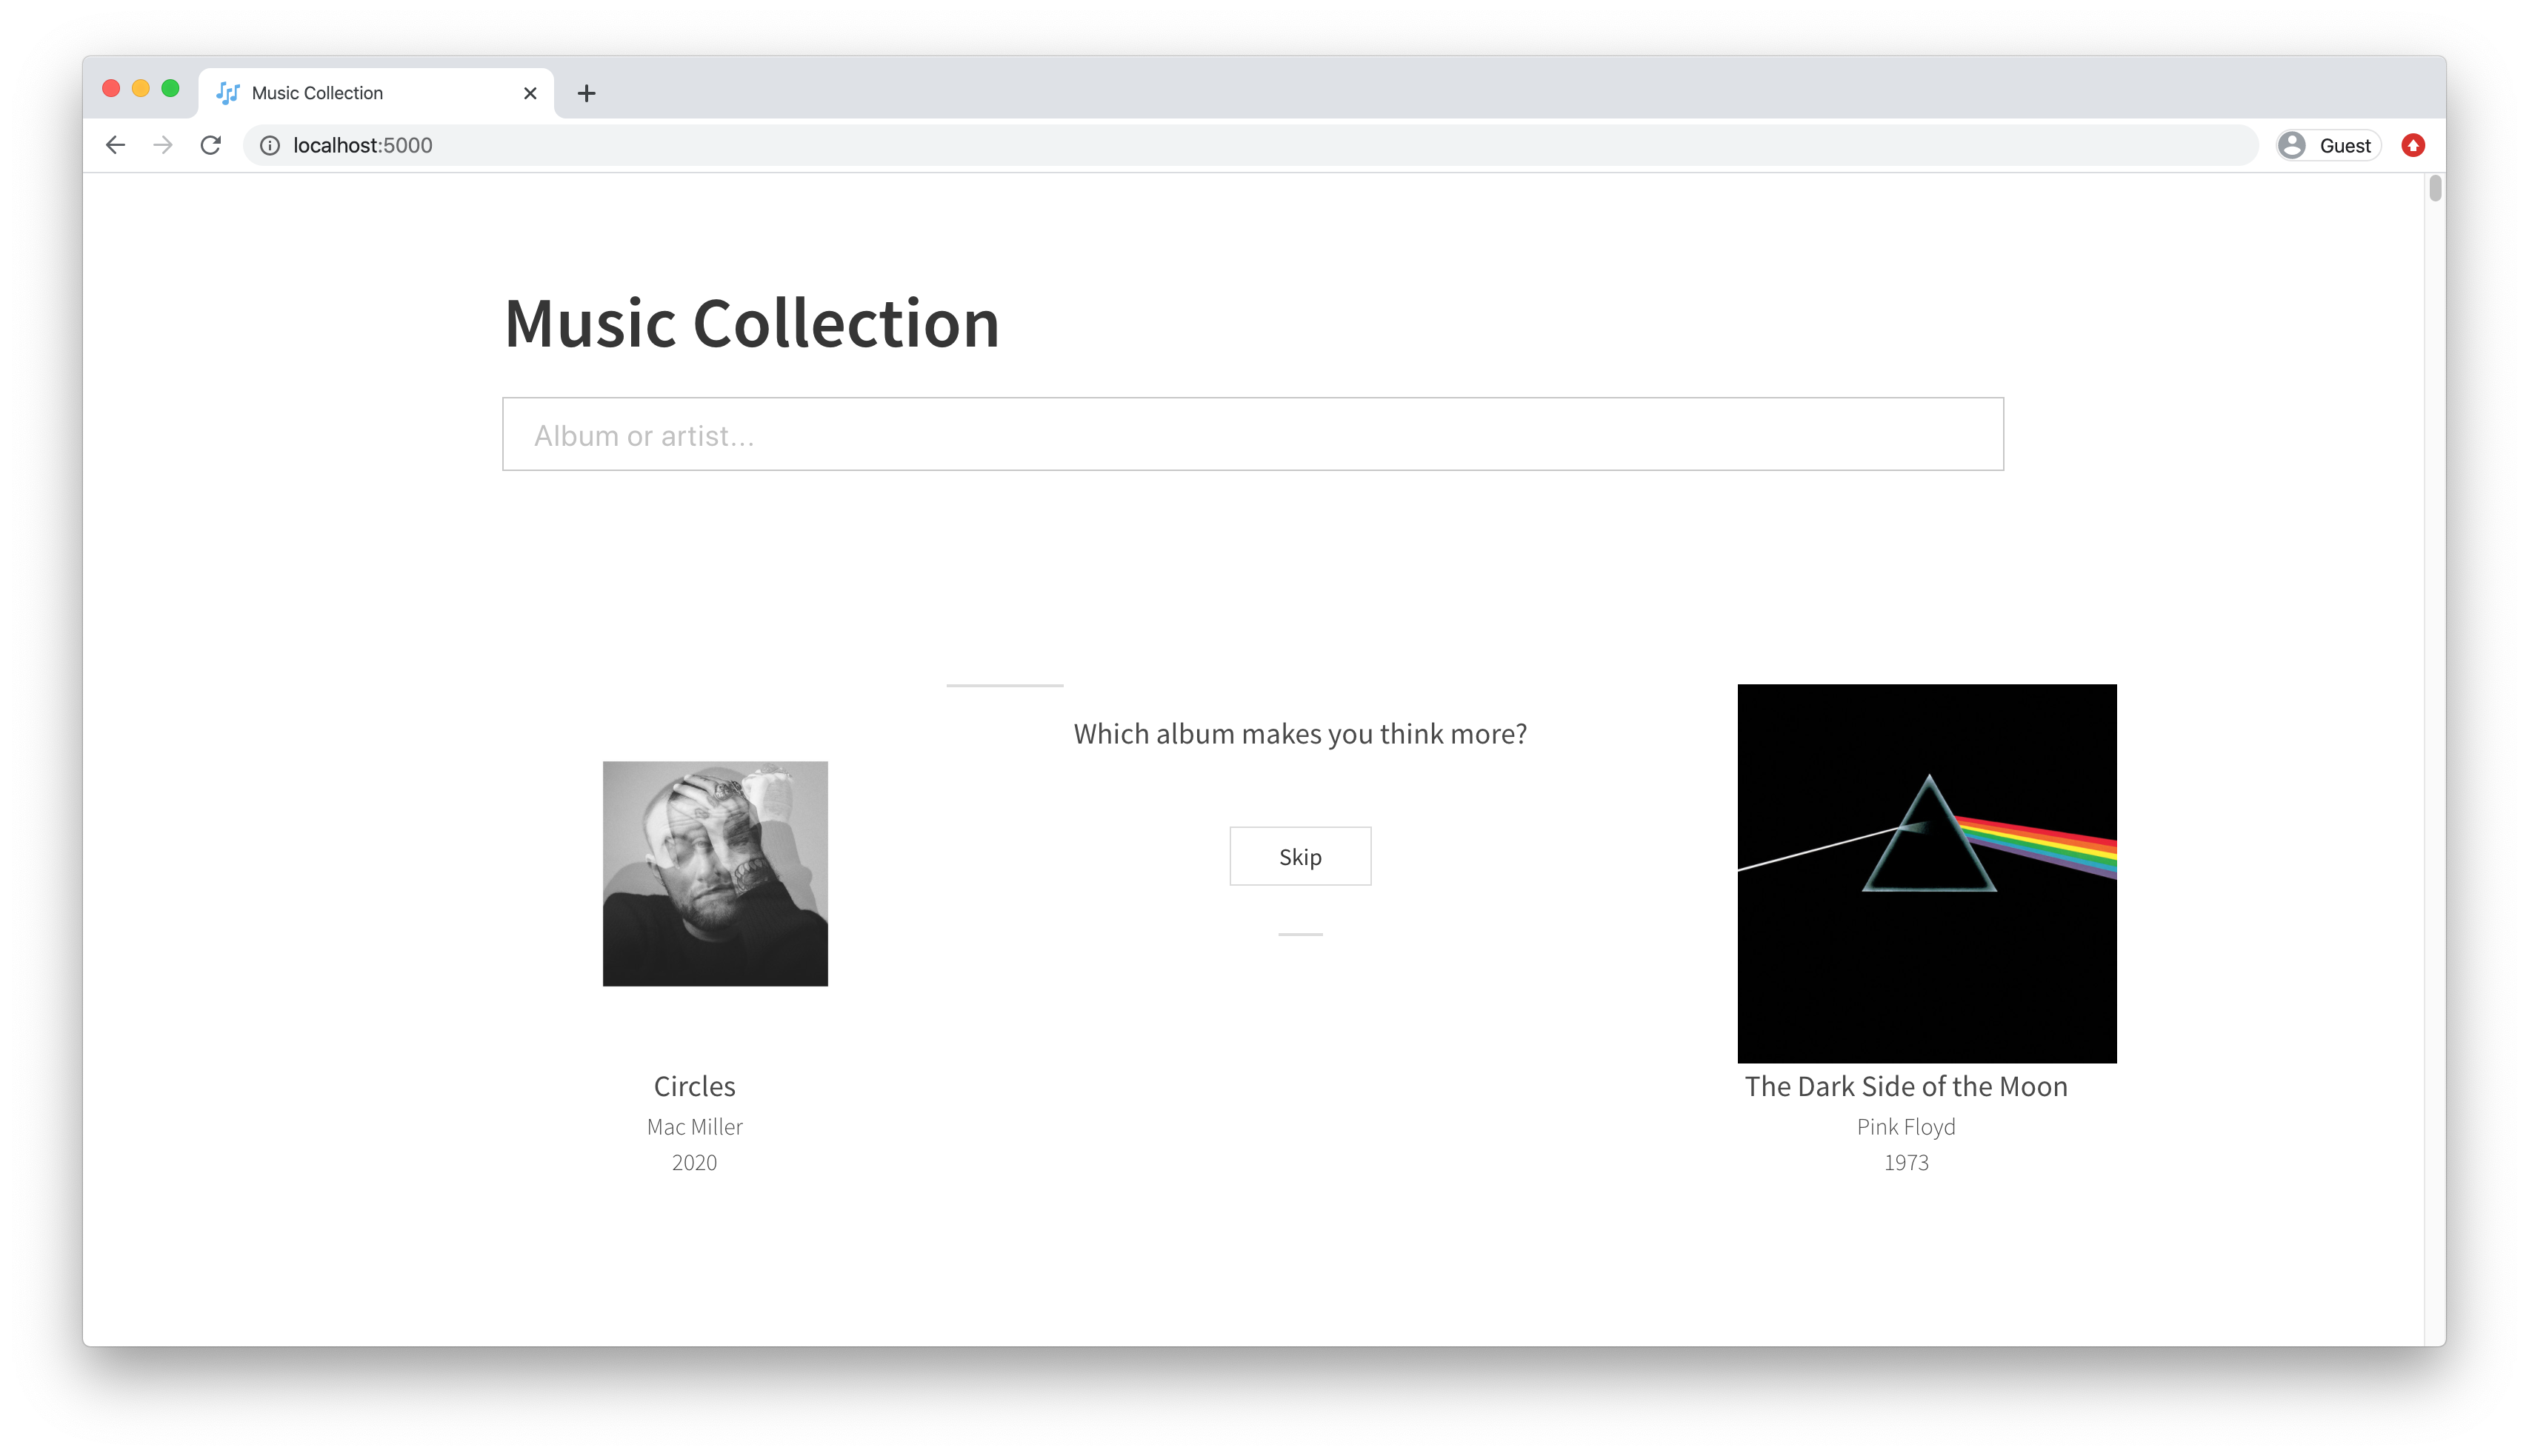 A screenshot of the music collection app while comparing two albums